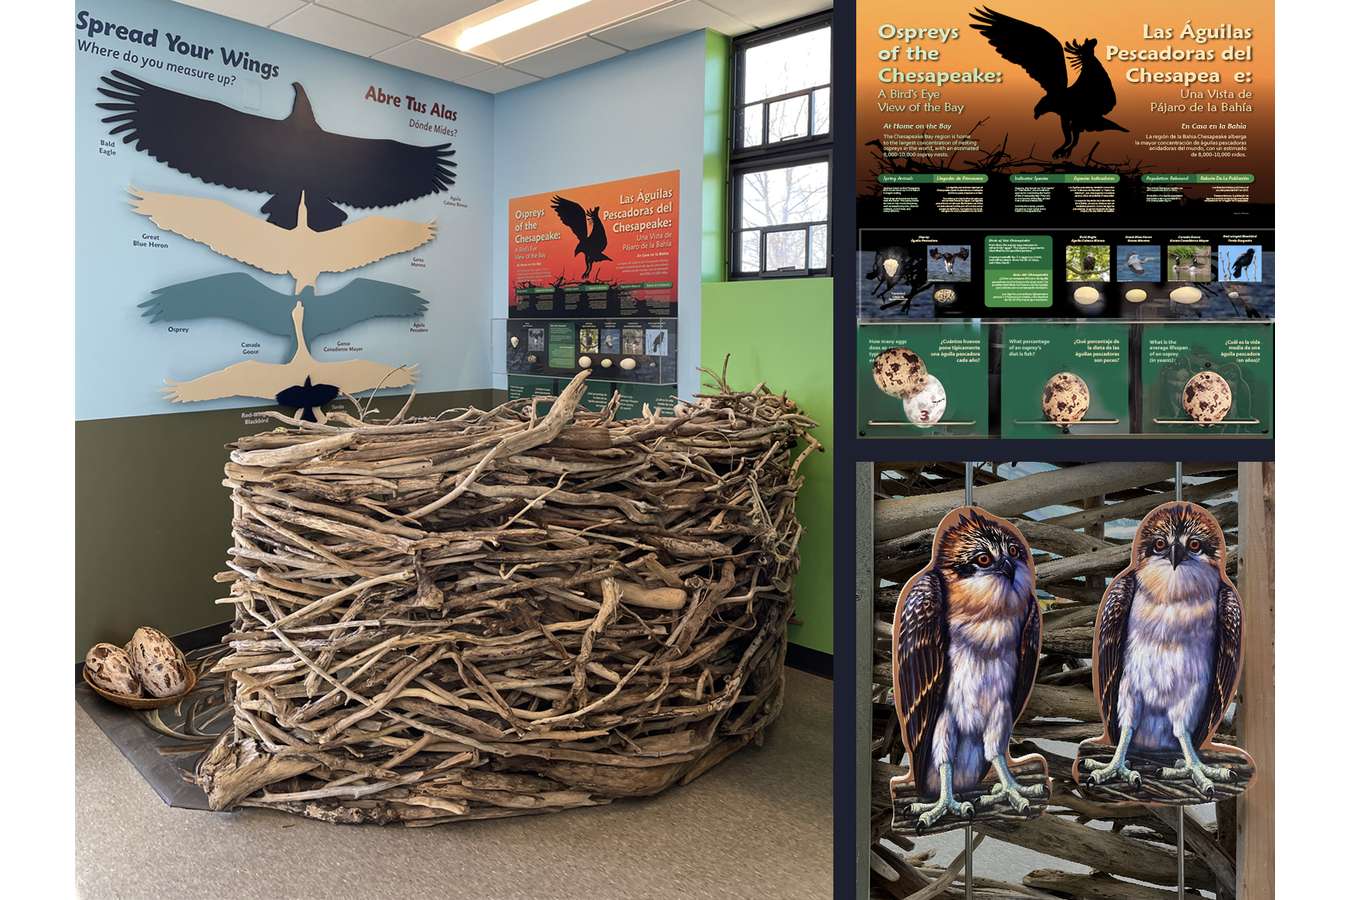 SPVC osprey nest composite 1 : Walk-in Osprey Nest explains importance of these migrating birds and their successful breeding in the Bay.  Compare Your Wing-Span with other Bay Birds  |  Imagine You're a Baby Osprey and Bounce Around with the Chicks